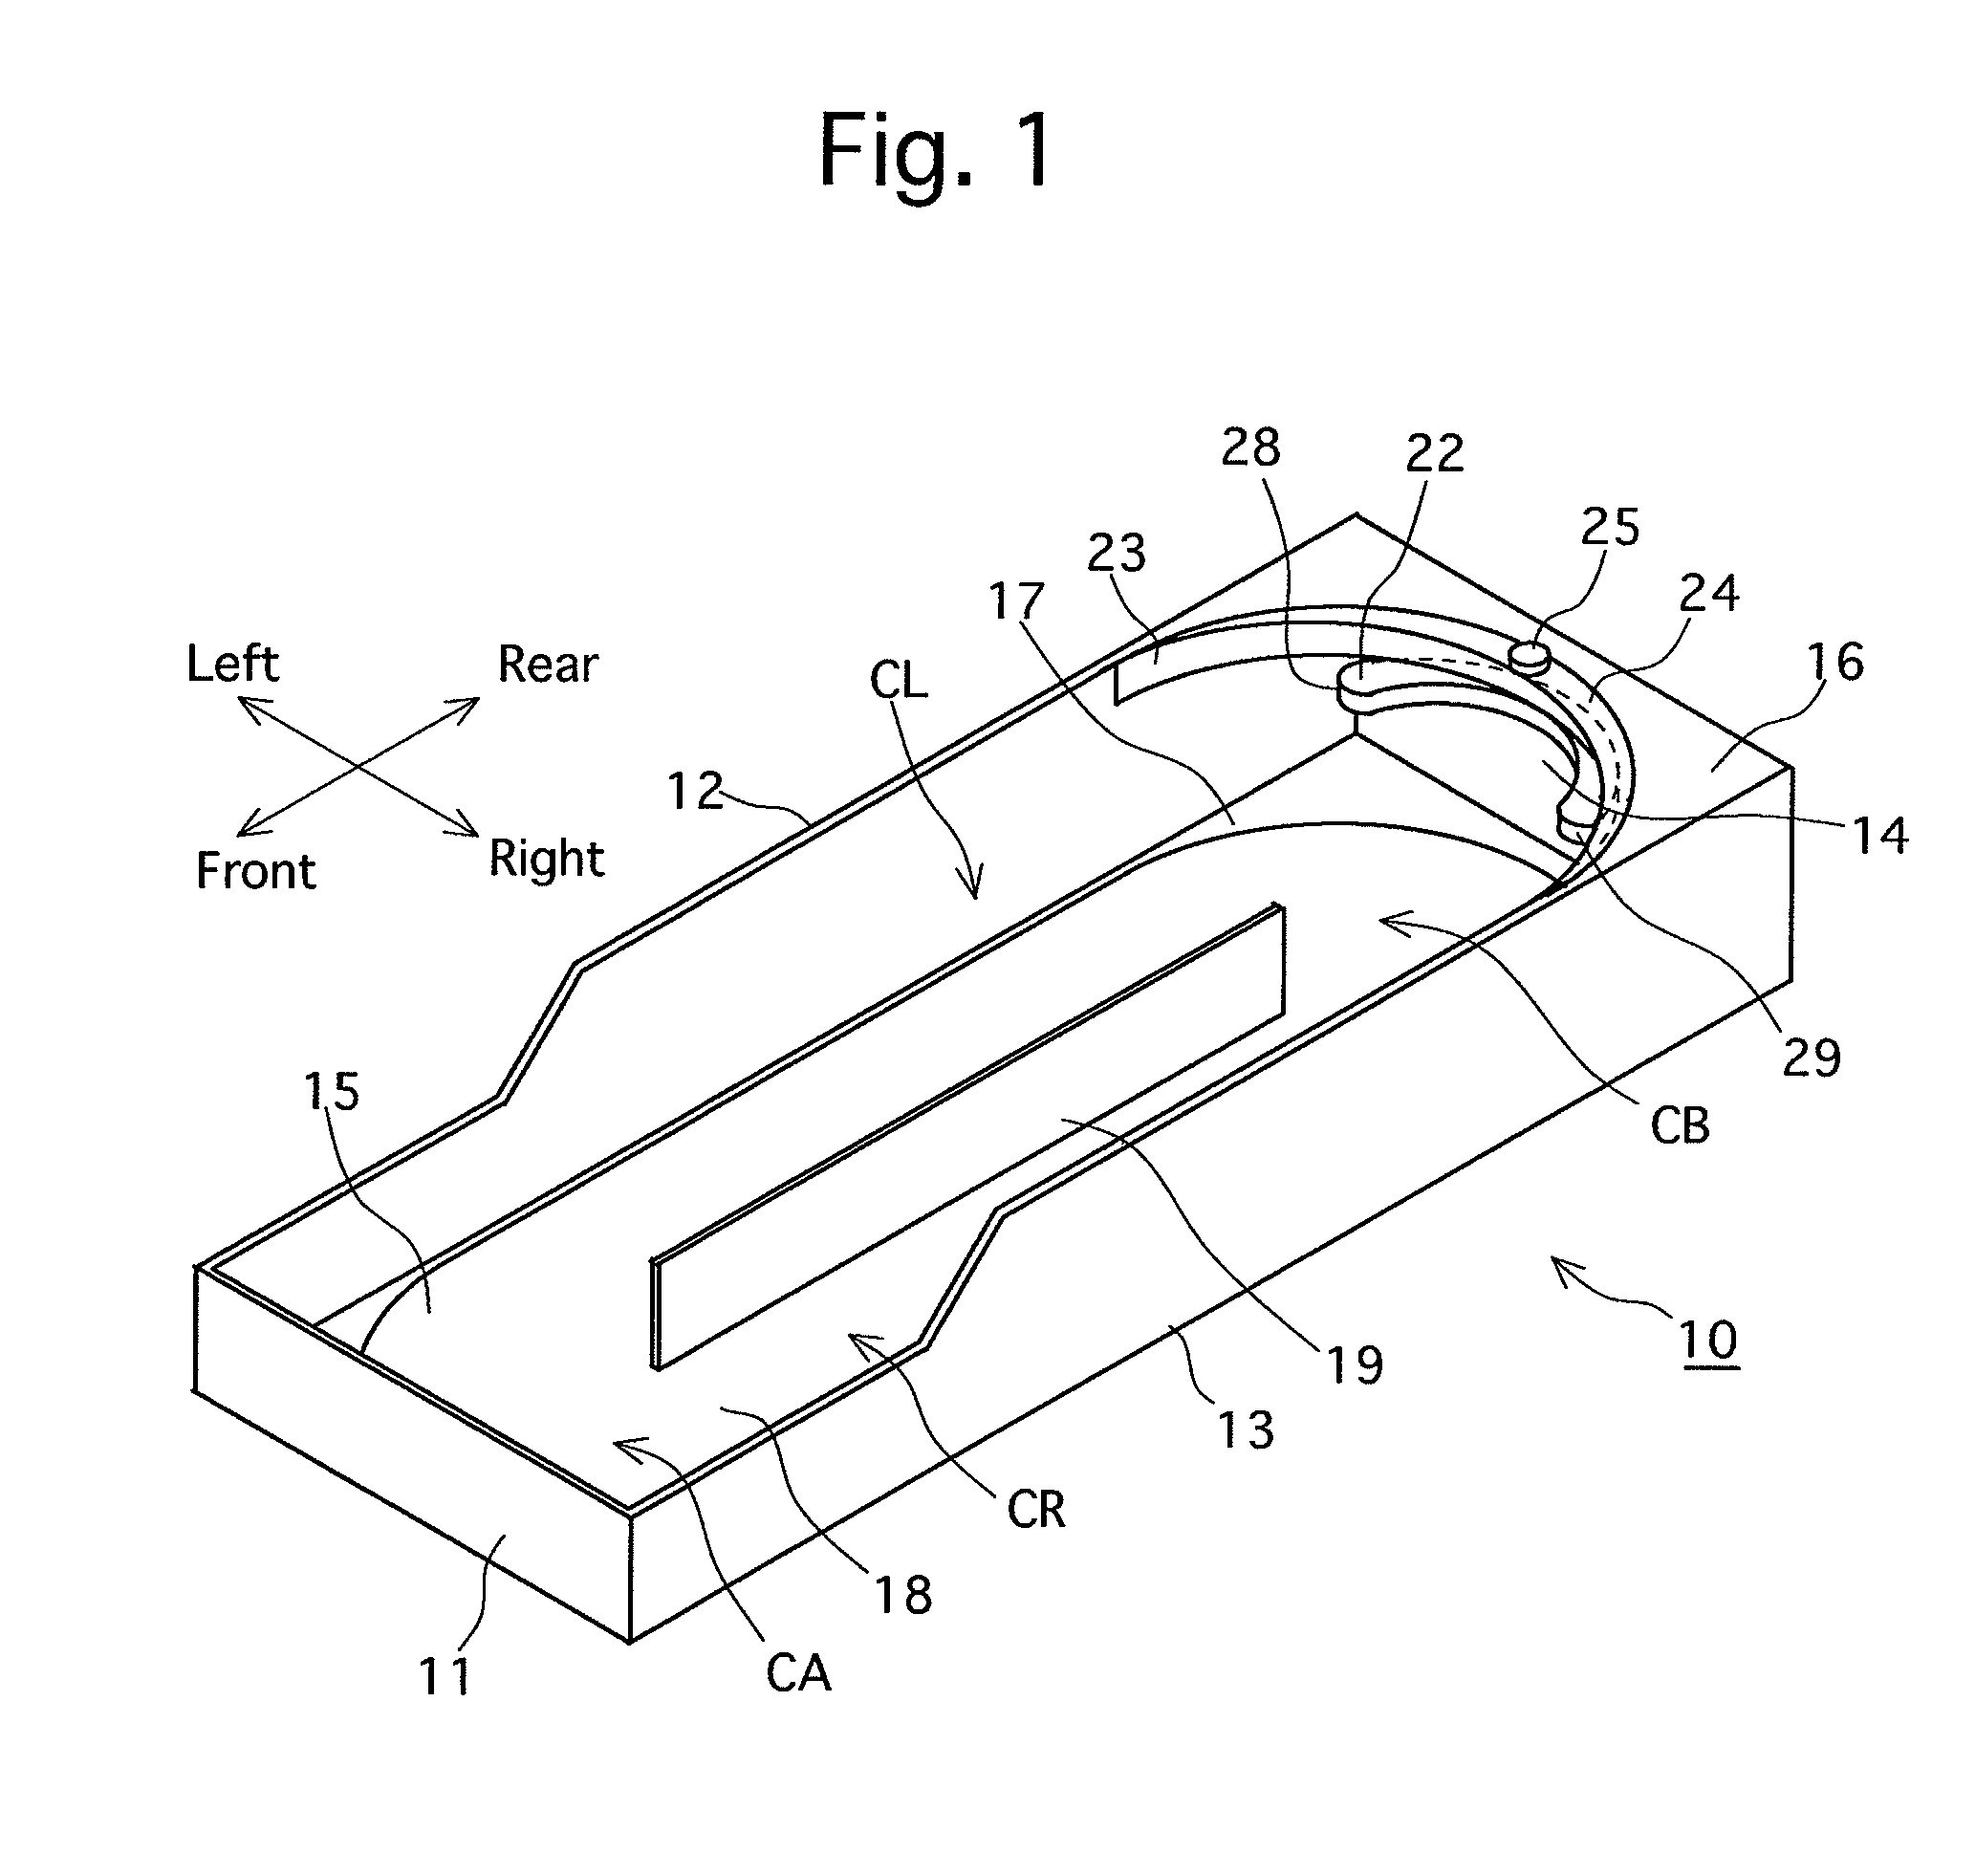 Article display tray provided with movement guide device, and movement guide device